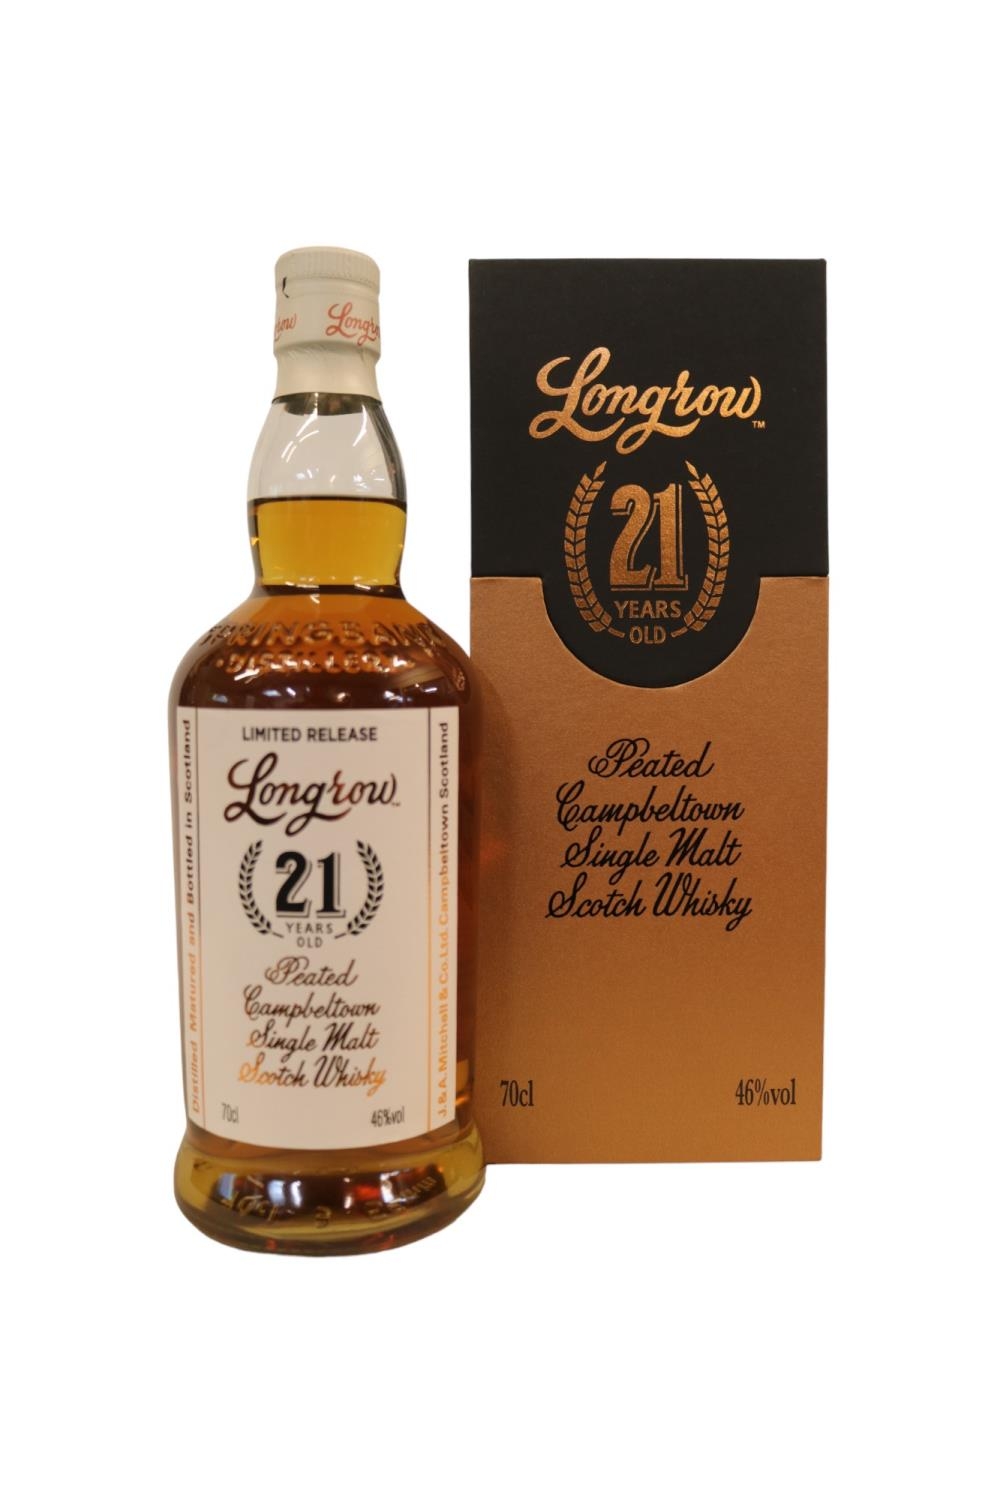 Longrow 21 Year Old Campbeltown Single Malt Scotch Whisky 70cl 46% Vol Boxed Limited Release